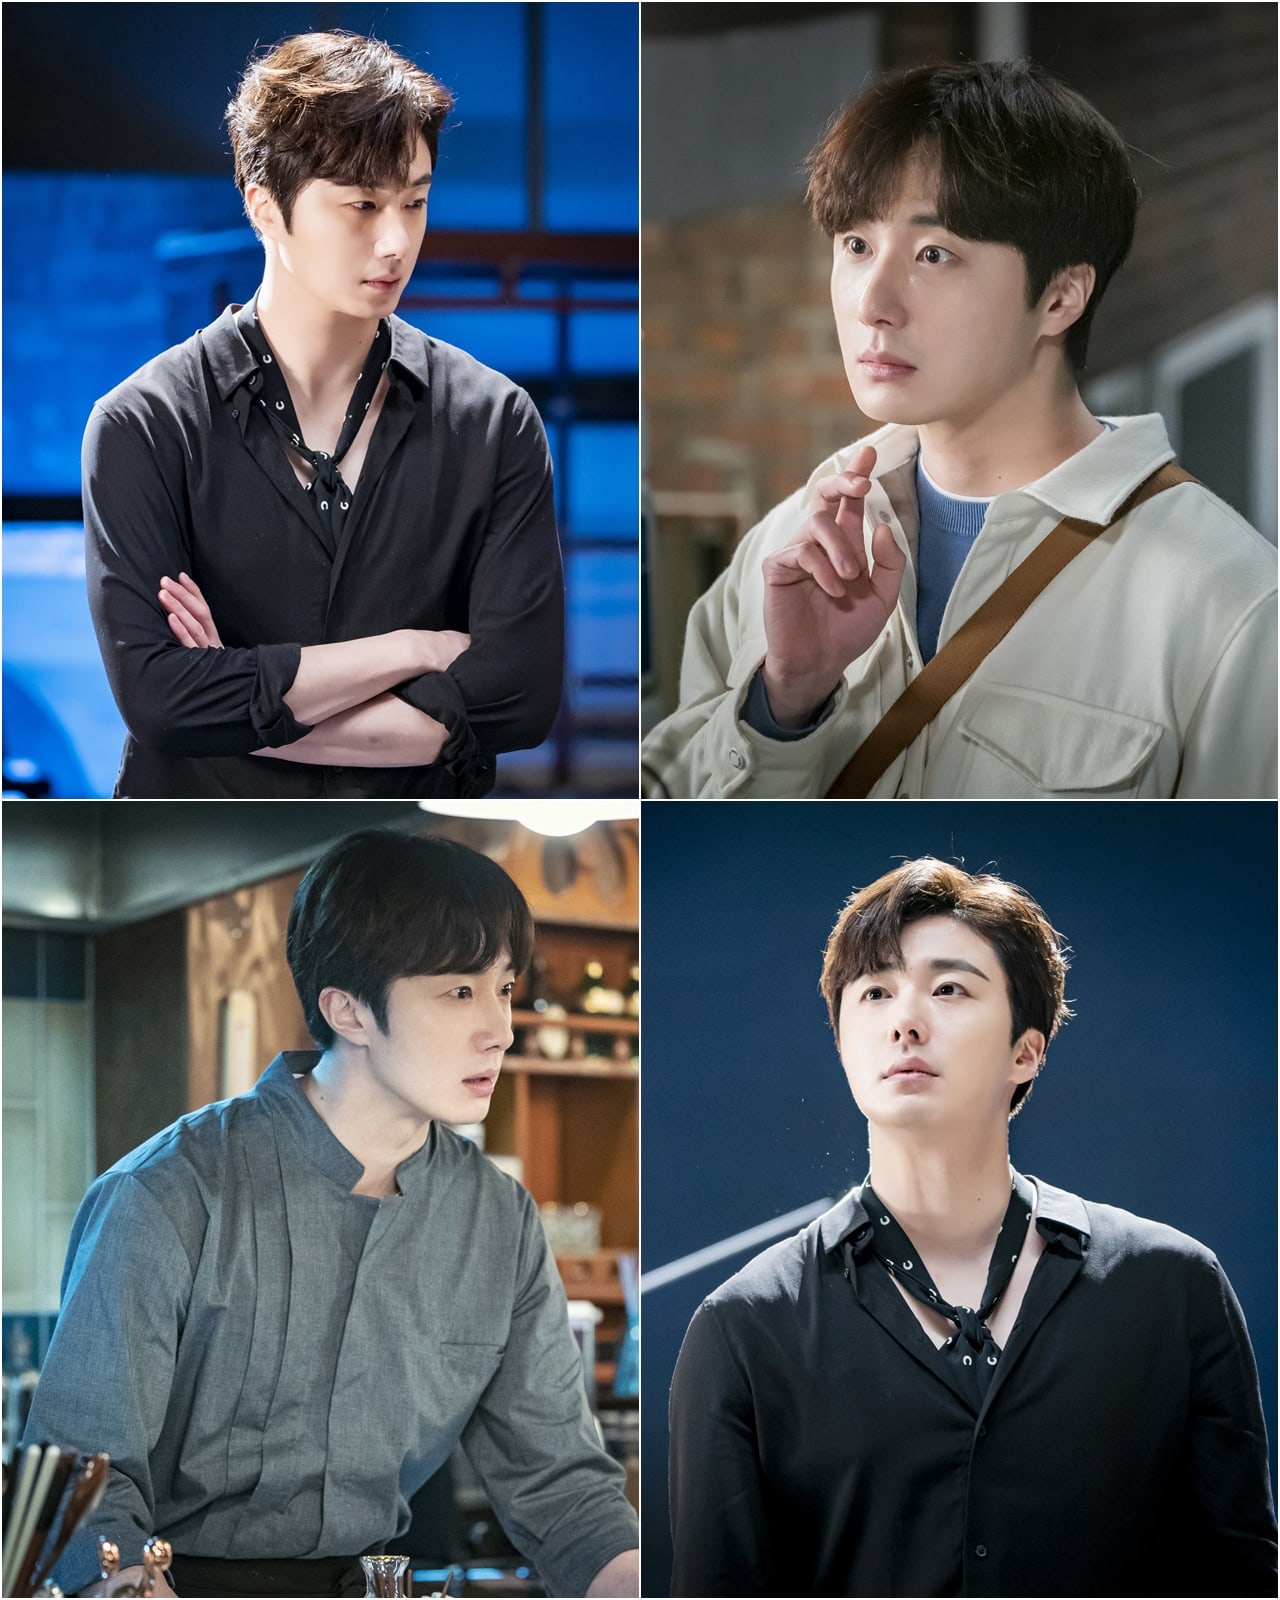 sweet-munchies-reveals-secrets-about-jung-il-woo-character-through-his-fashion-1